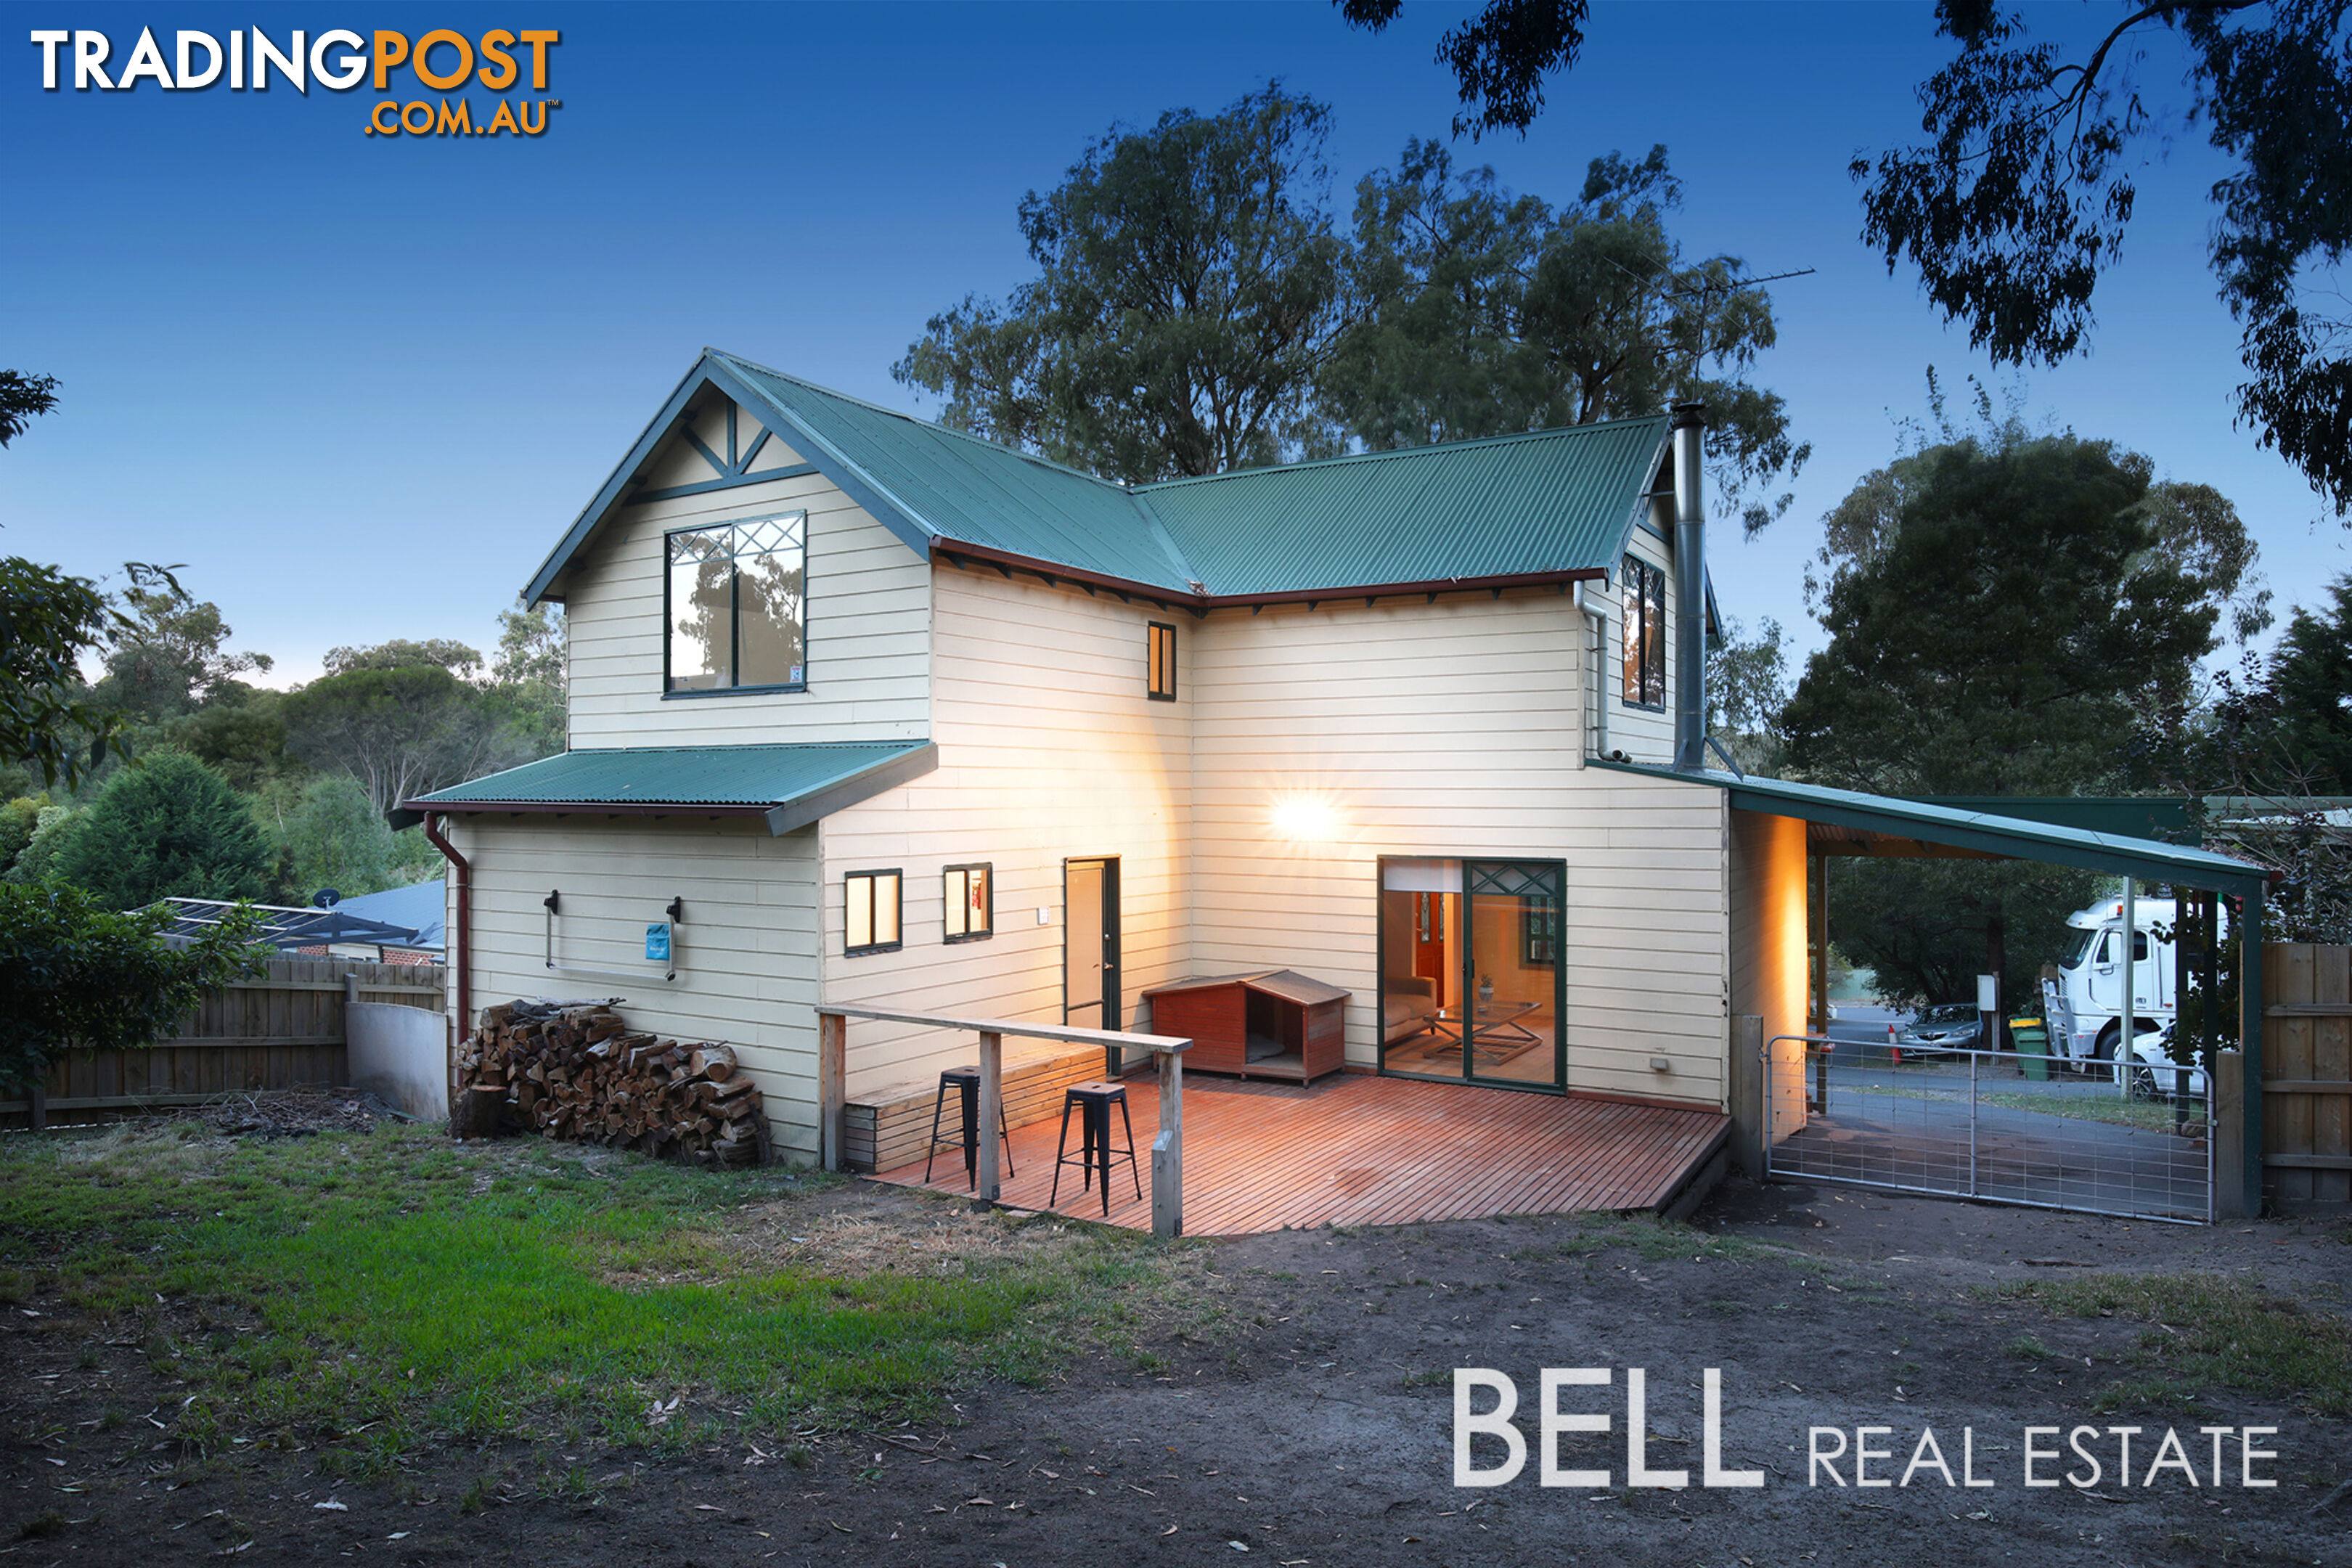 29A Rangeview Road MOUNT EVELYN VIC 3796